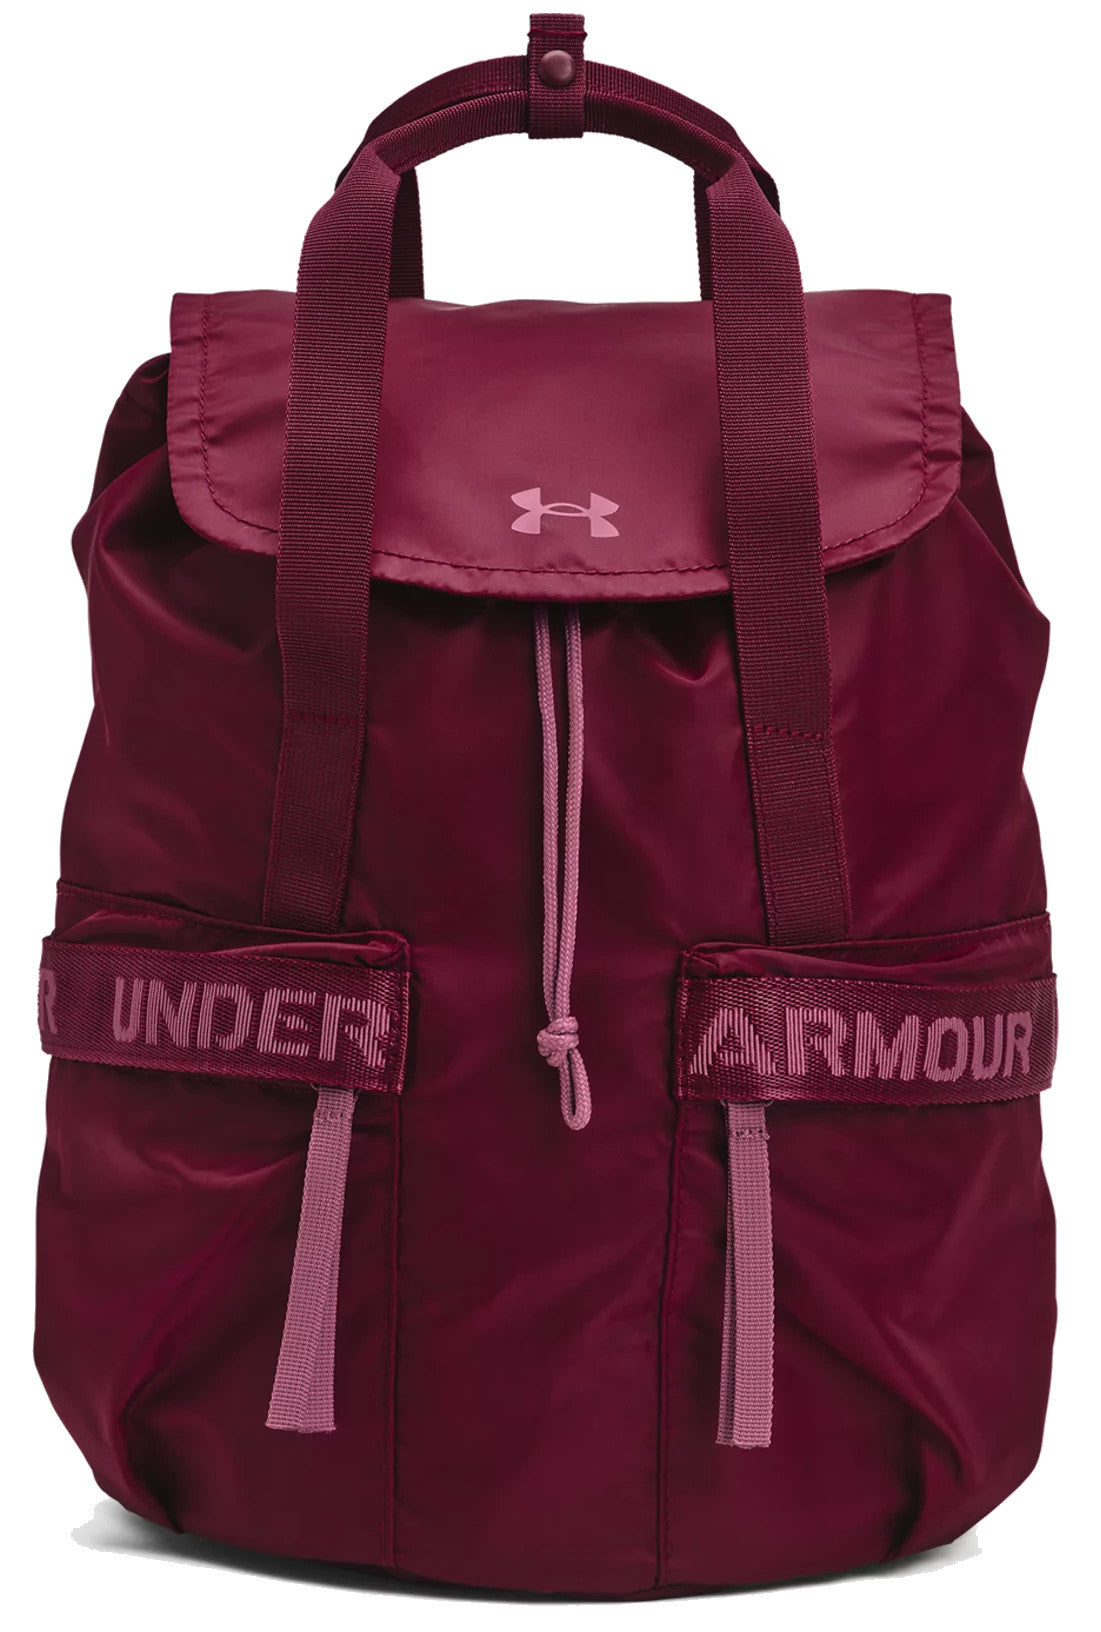 Under Armour Favorite Backpack – Central